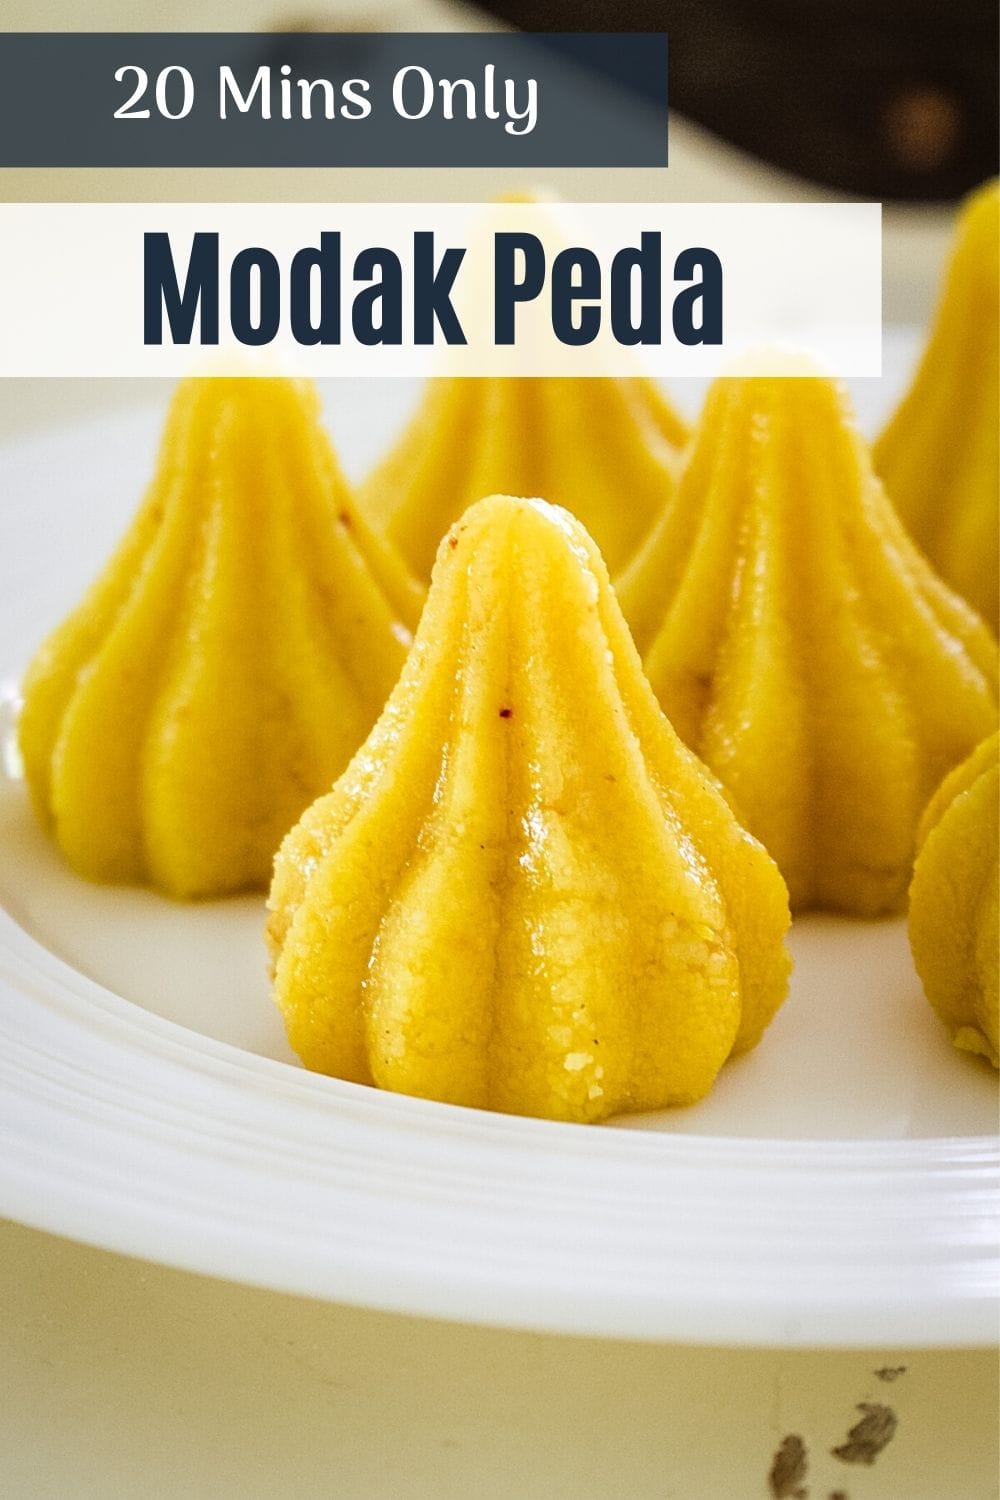 Modak peda on a plate with text on top says 20 mins only modak peda.